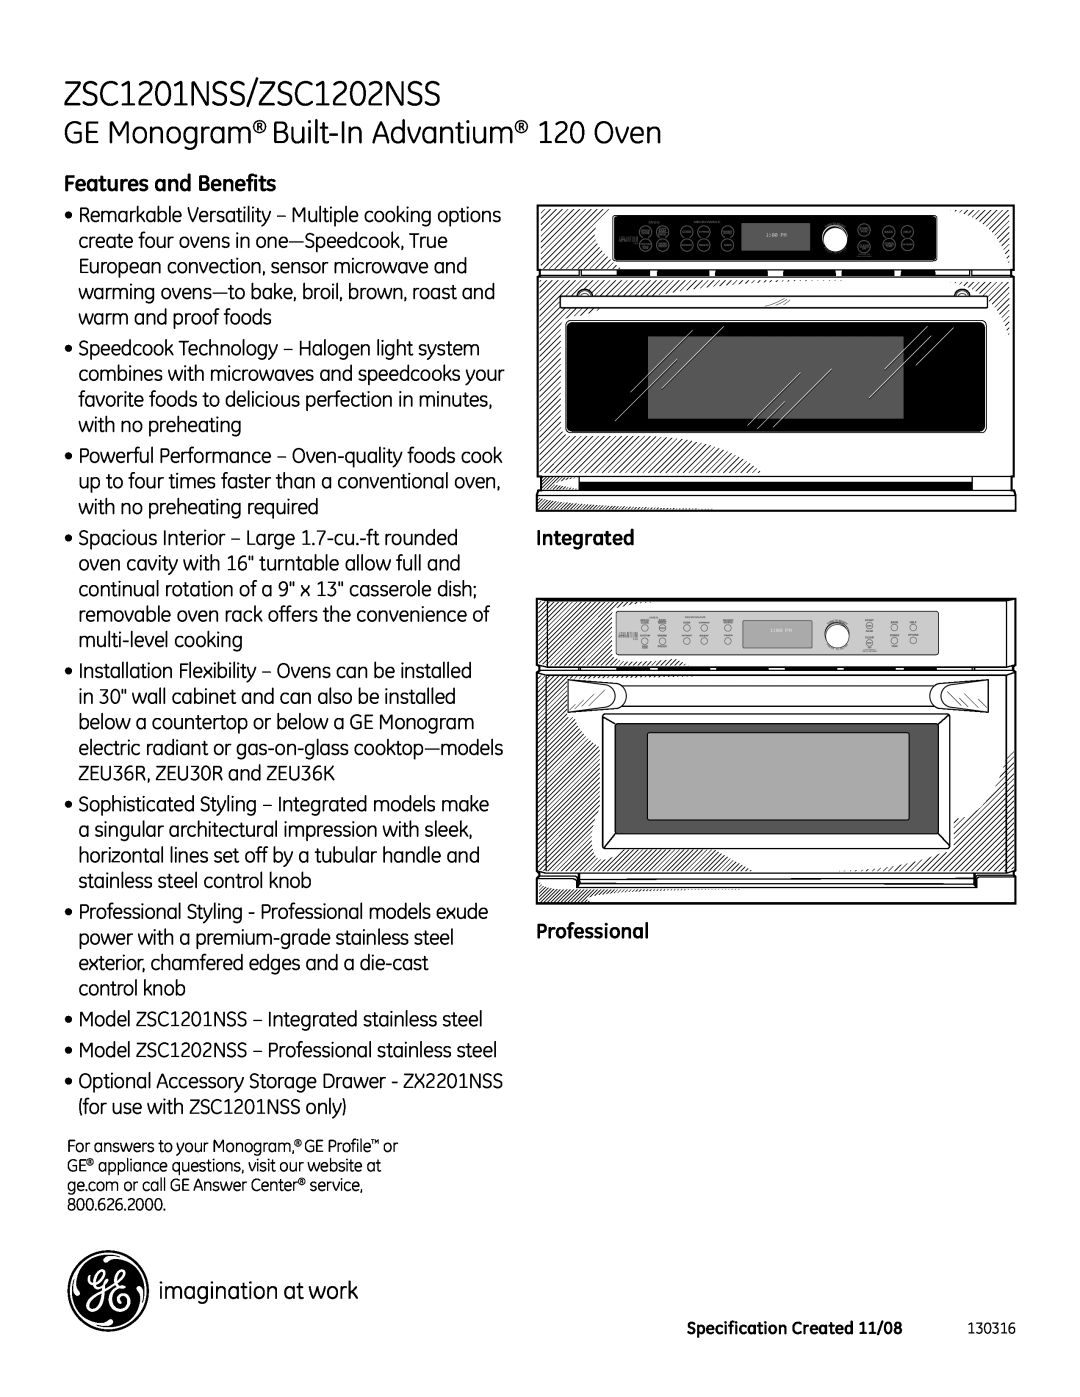 GE ZSC1201NSS/ZSC1202NSS, GE Monogram Built-InAdvantium 120 Oven, Features and Benefits, Integrated, Professional 